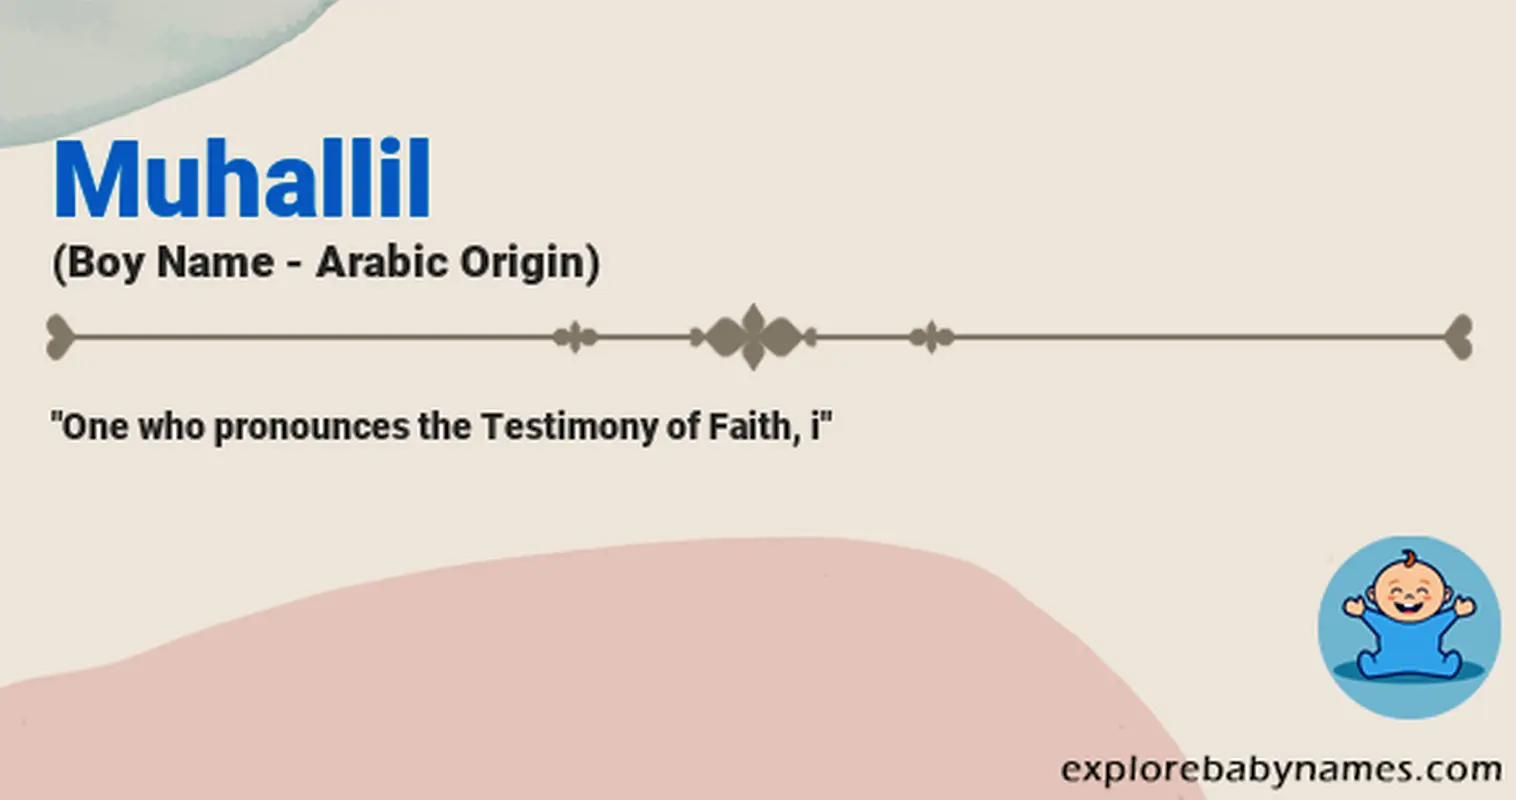 Meaning of Muhallil